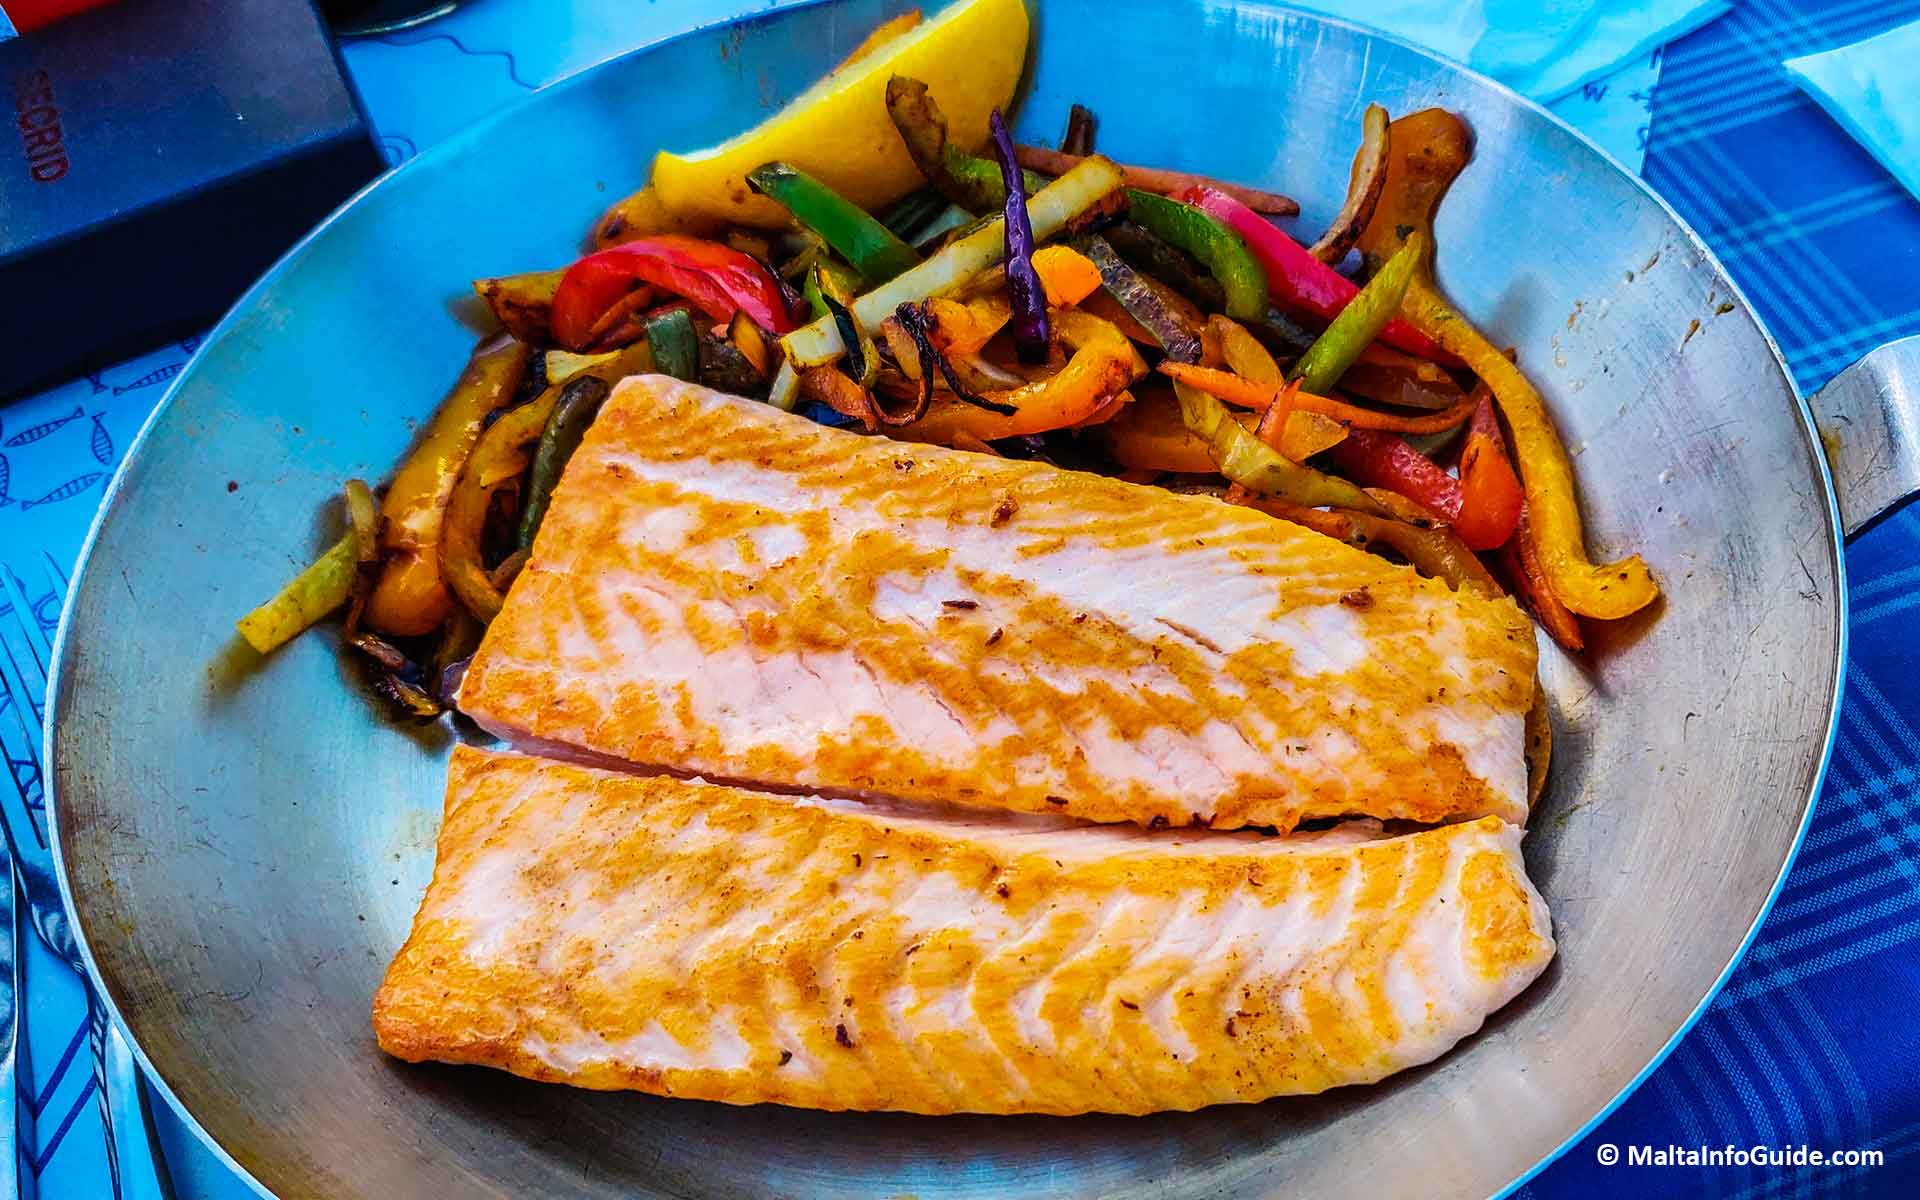 A salmon dish with vegetables on the side.